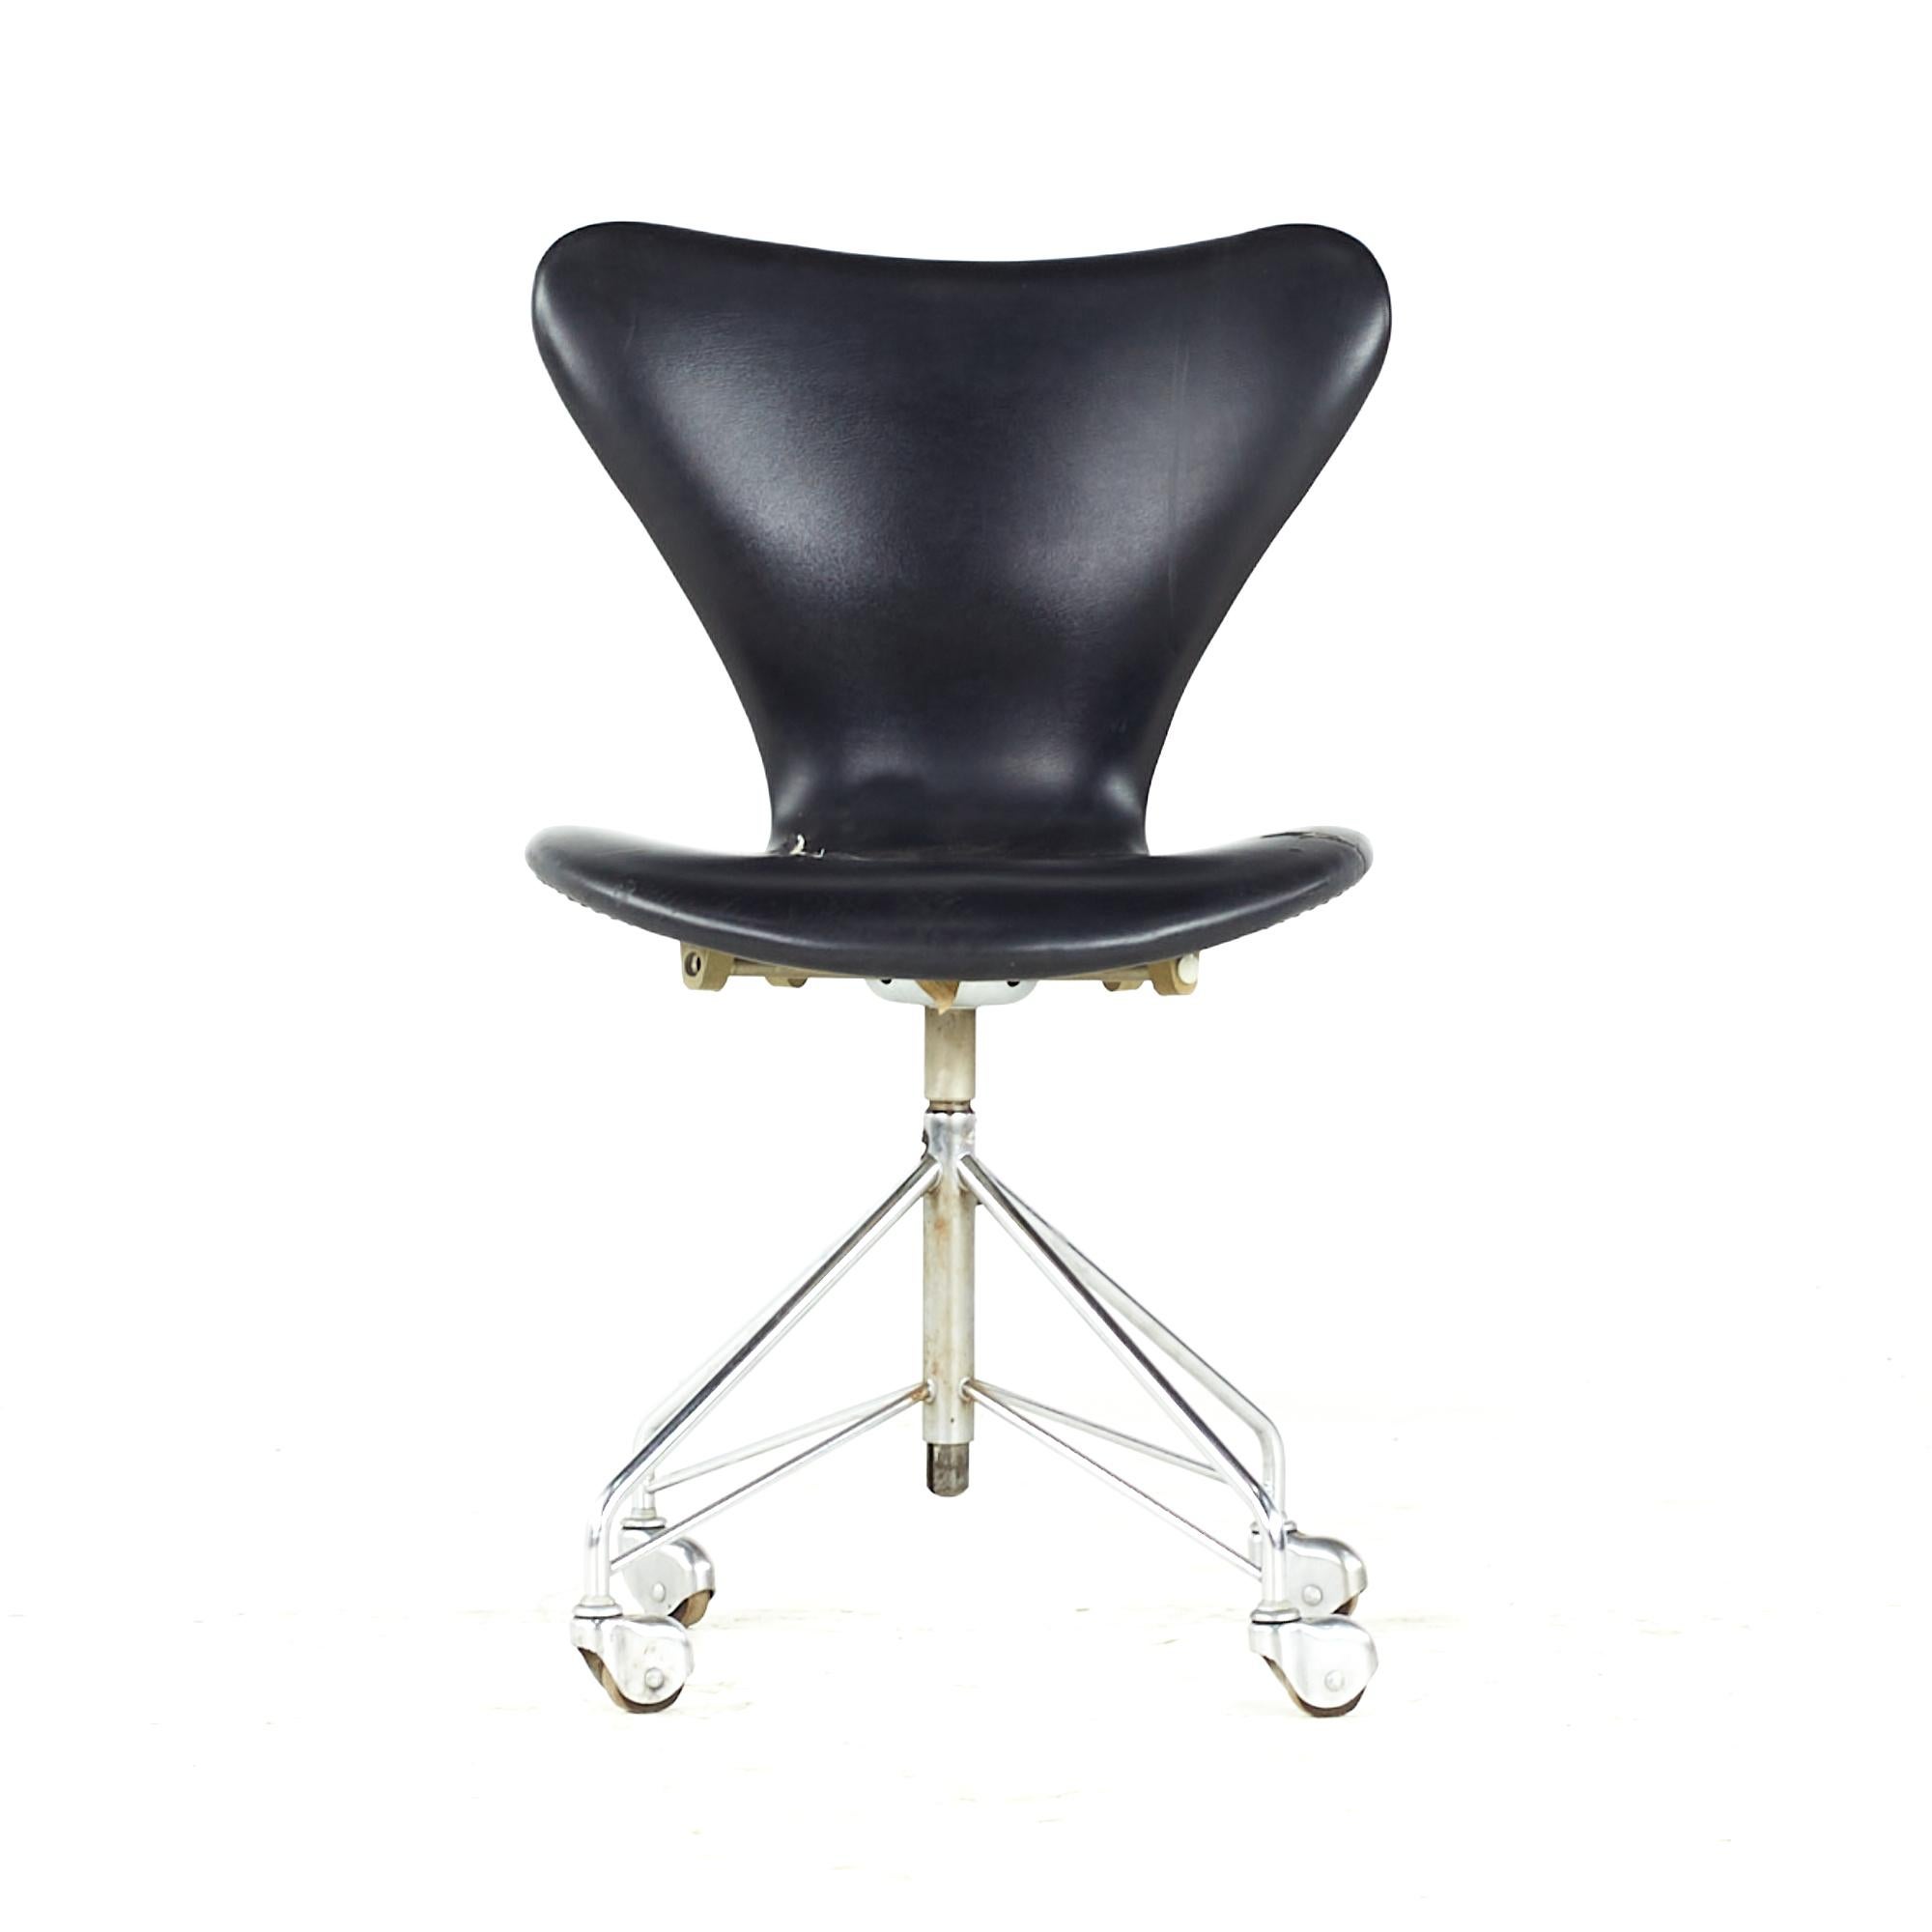 Arne Jacobsen Fritz Hansen midcentury Wheeled Chair

This chair measures: 19.5 wide x 19.5 deep x 32 inches high, with a seat height/chair clearance of 18.25 inches

All pieces of furniture can be had in what we call restored vintage condition.